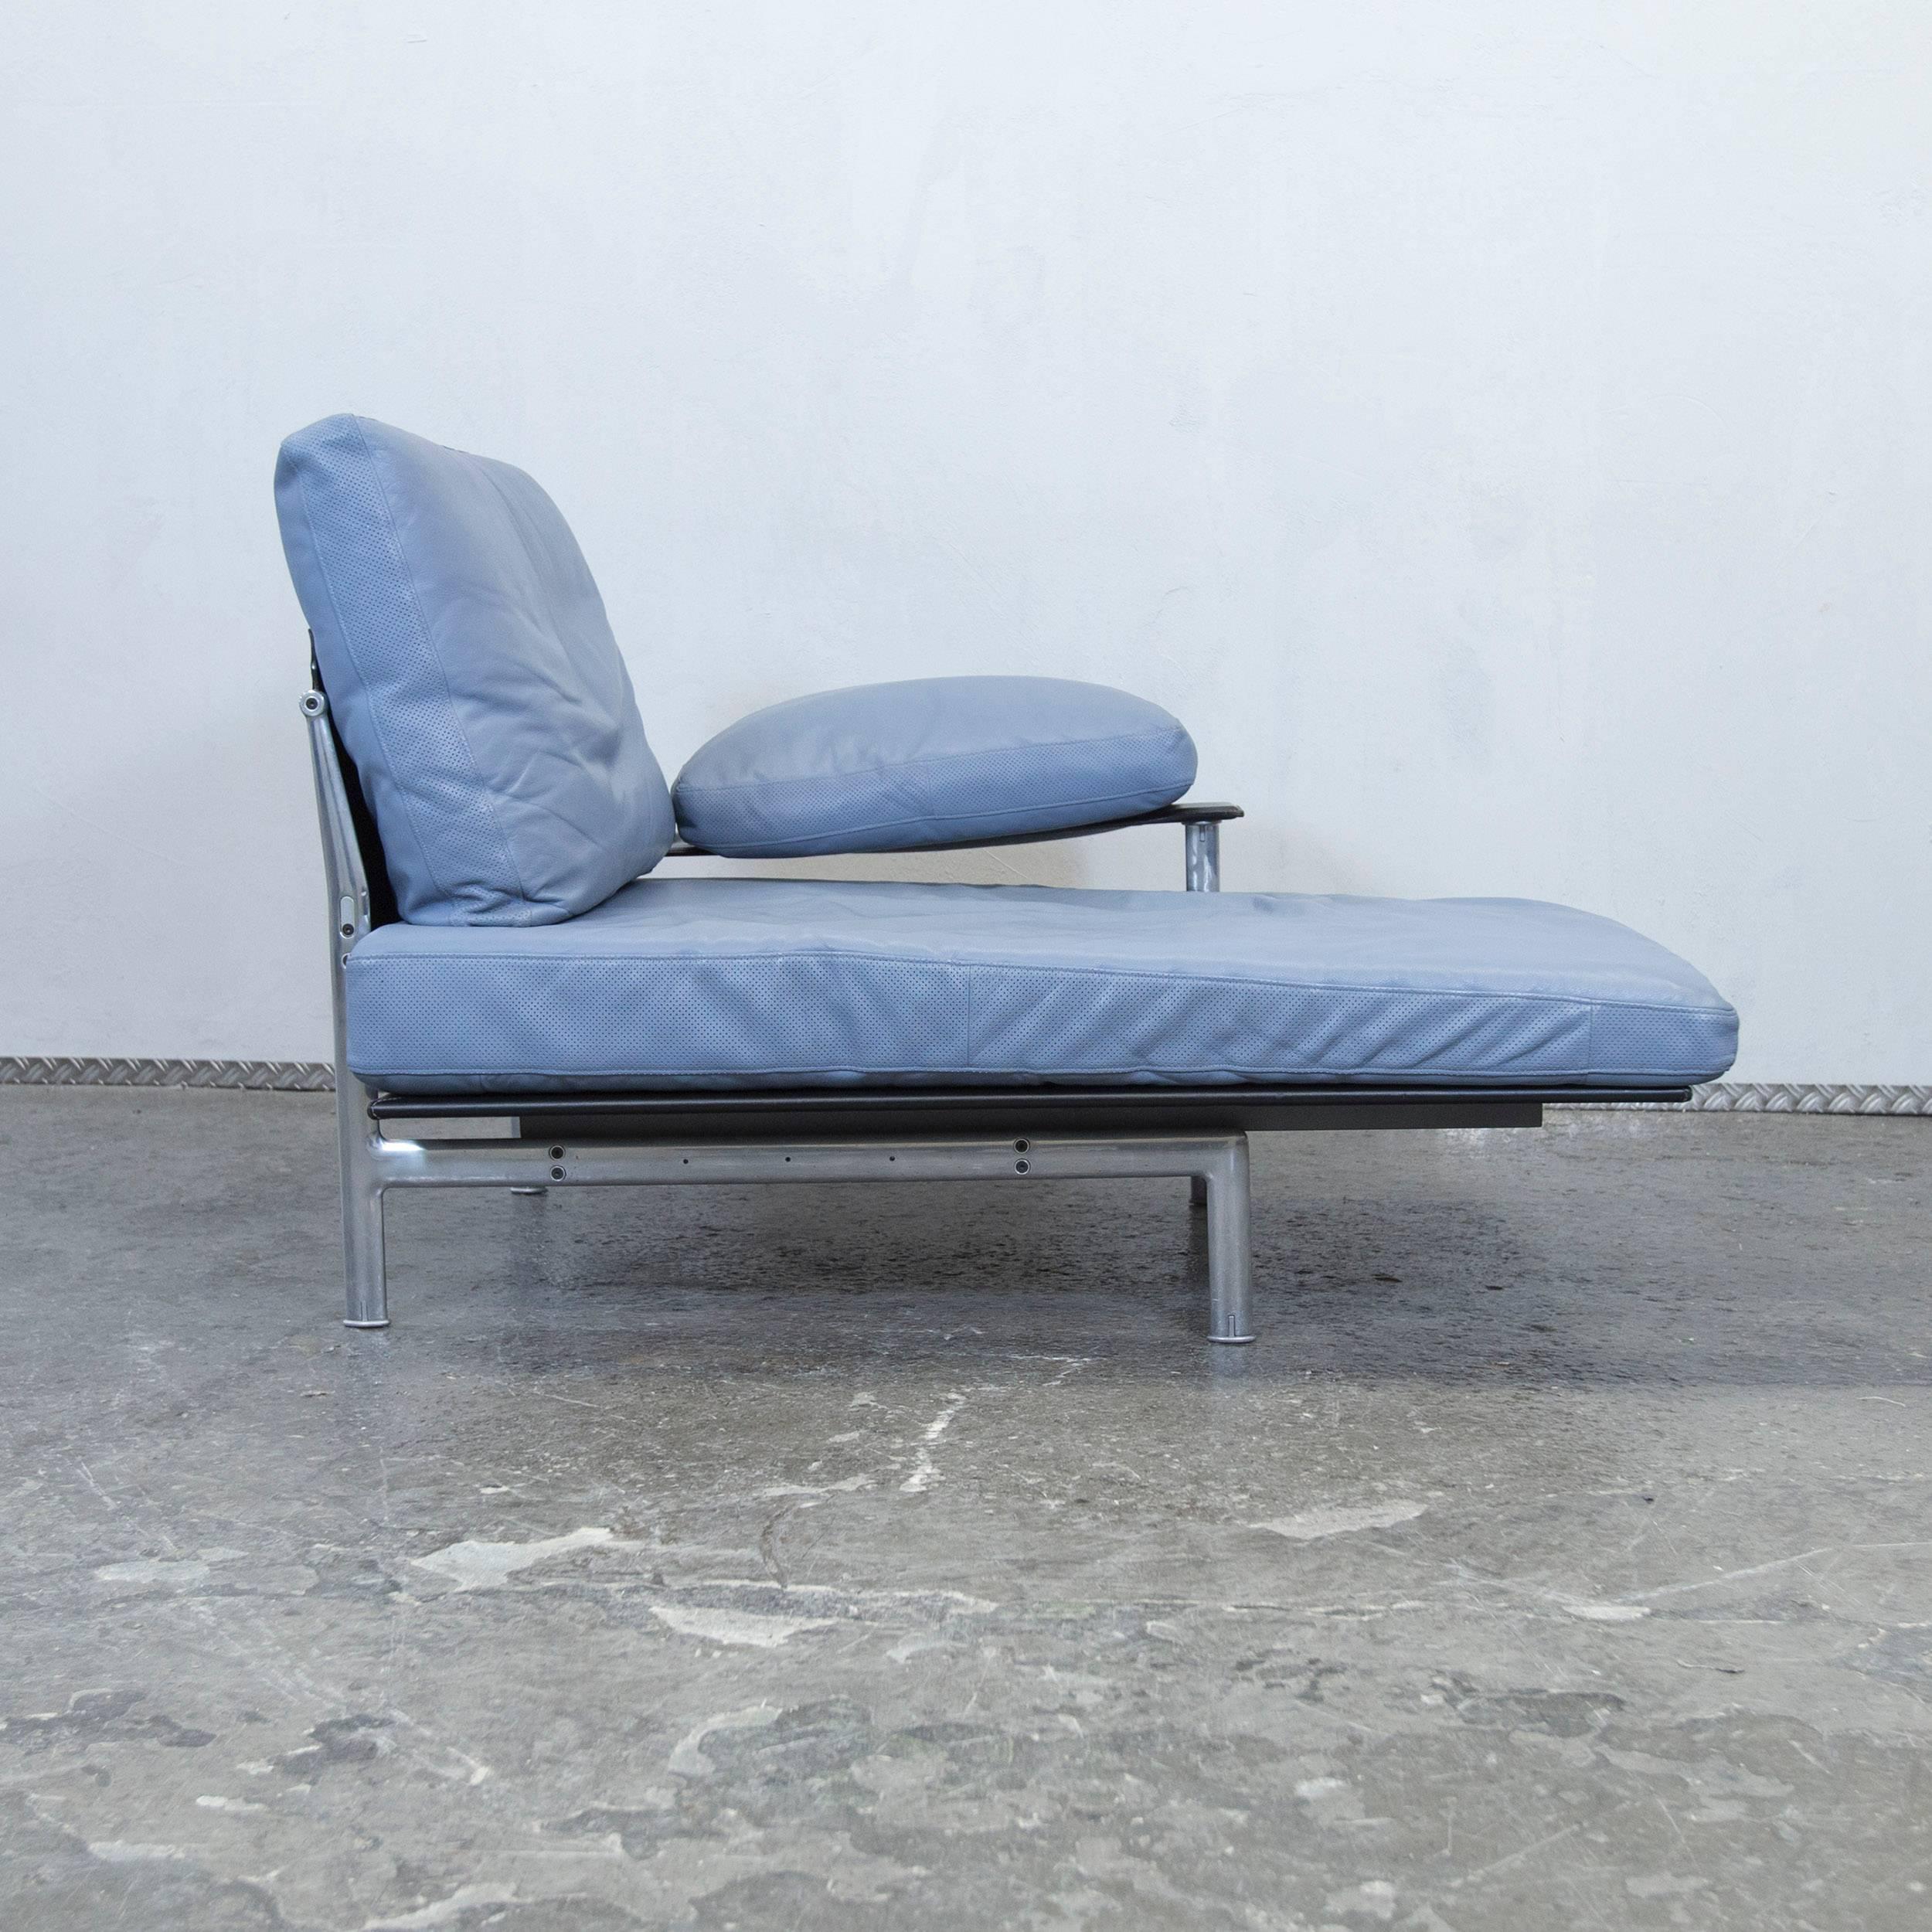 B&B Italia Designer Recamier Blue Leather Chaise Lounge Couch Modern 4